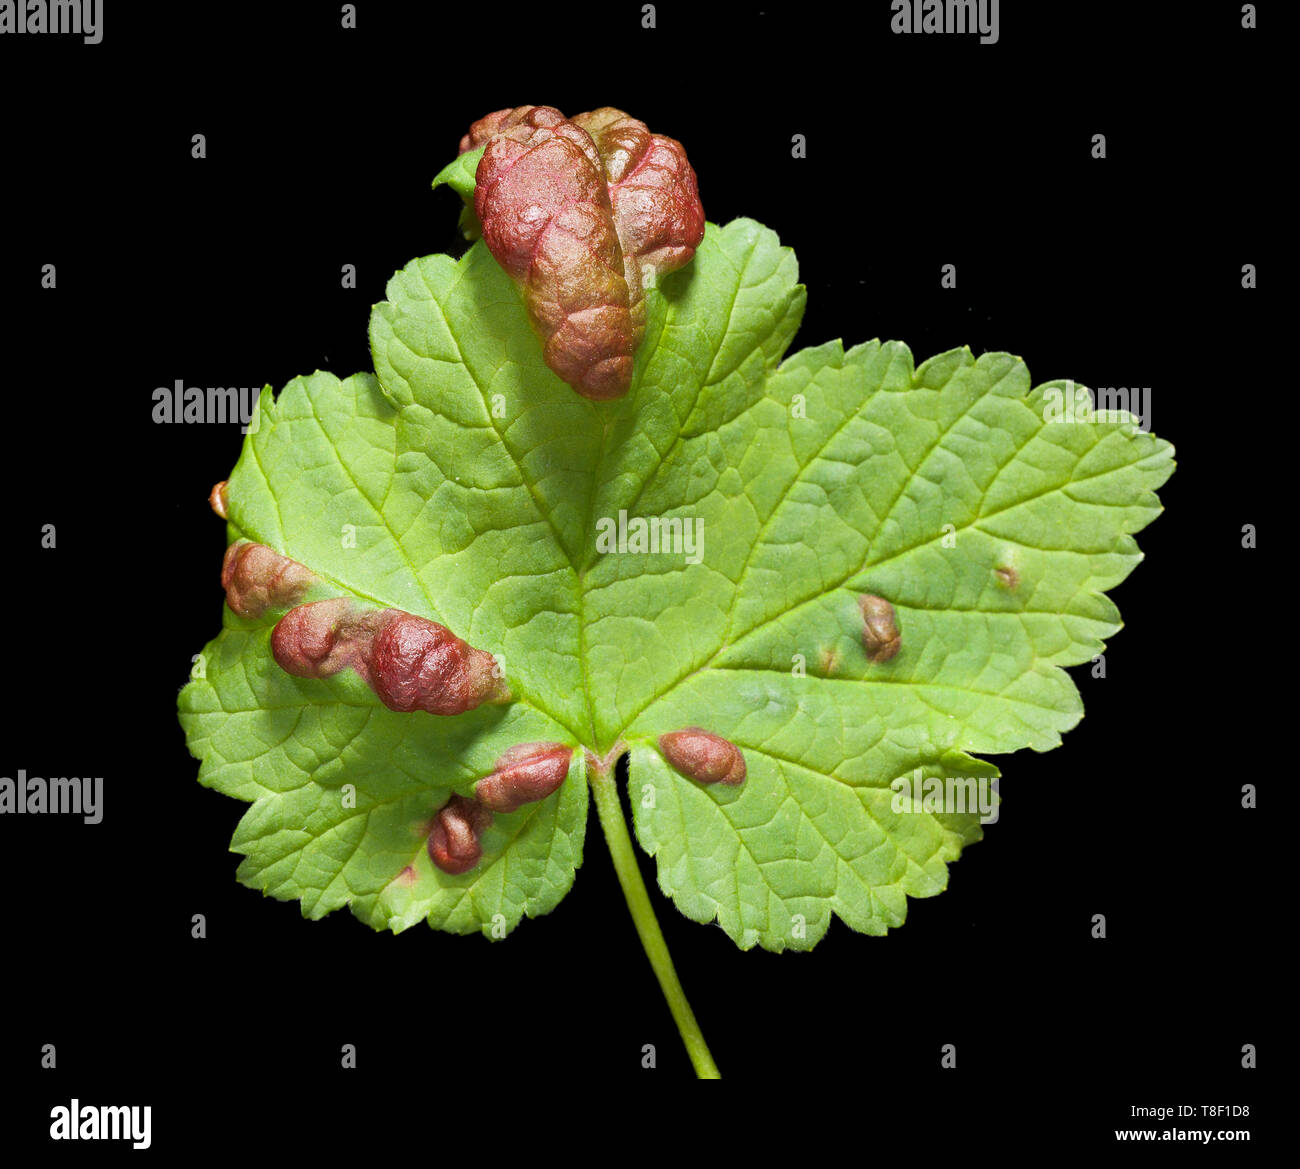 Red currant blight on a red currant leaf, caused by currant blister aphid  Stock Photo - Alamy